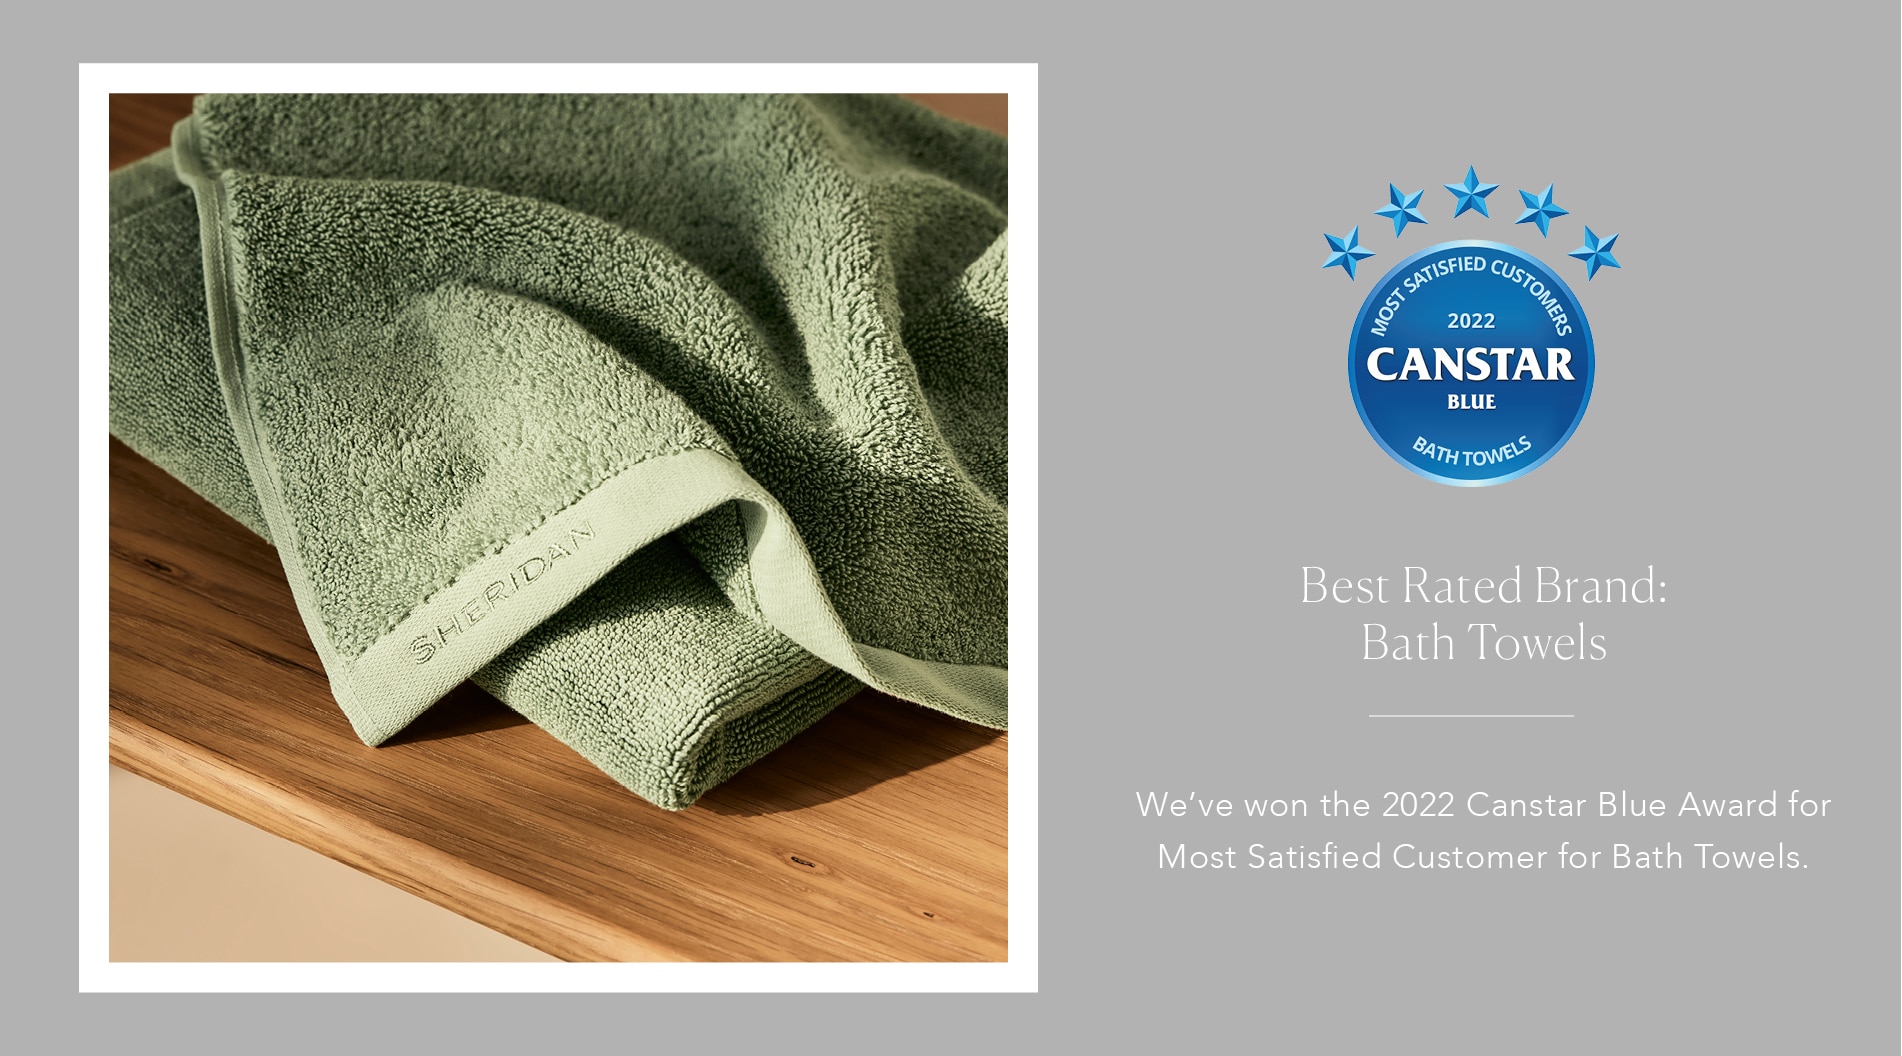 styled slice. grey background, with square image of green towel on wooden slat, surrounded by white border. left side has canstar award logo, saying best rated brand bath towels.